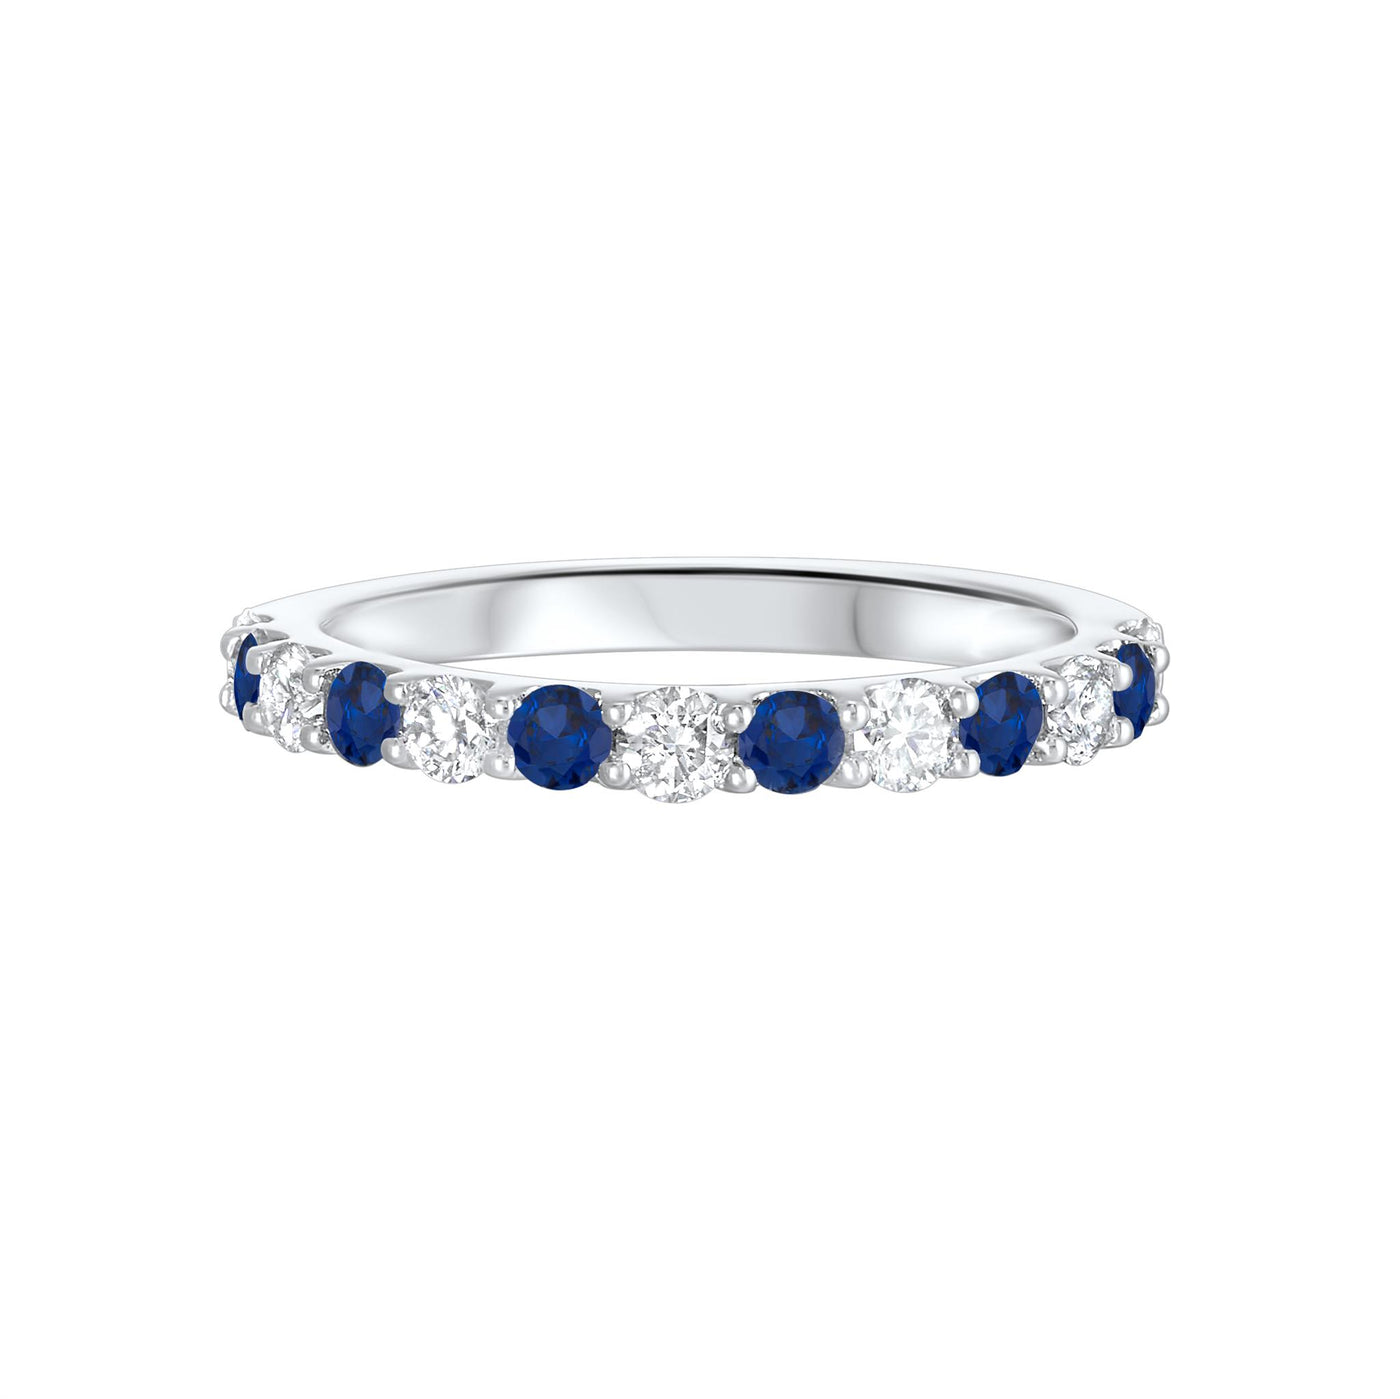 14K White Gold .99ctw Alternating Gemstone Style Ring with Diamonds and Sapphires